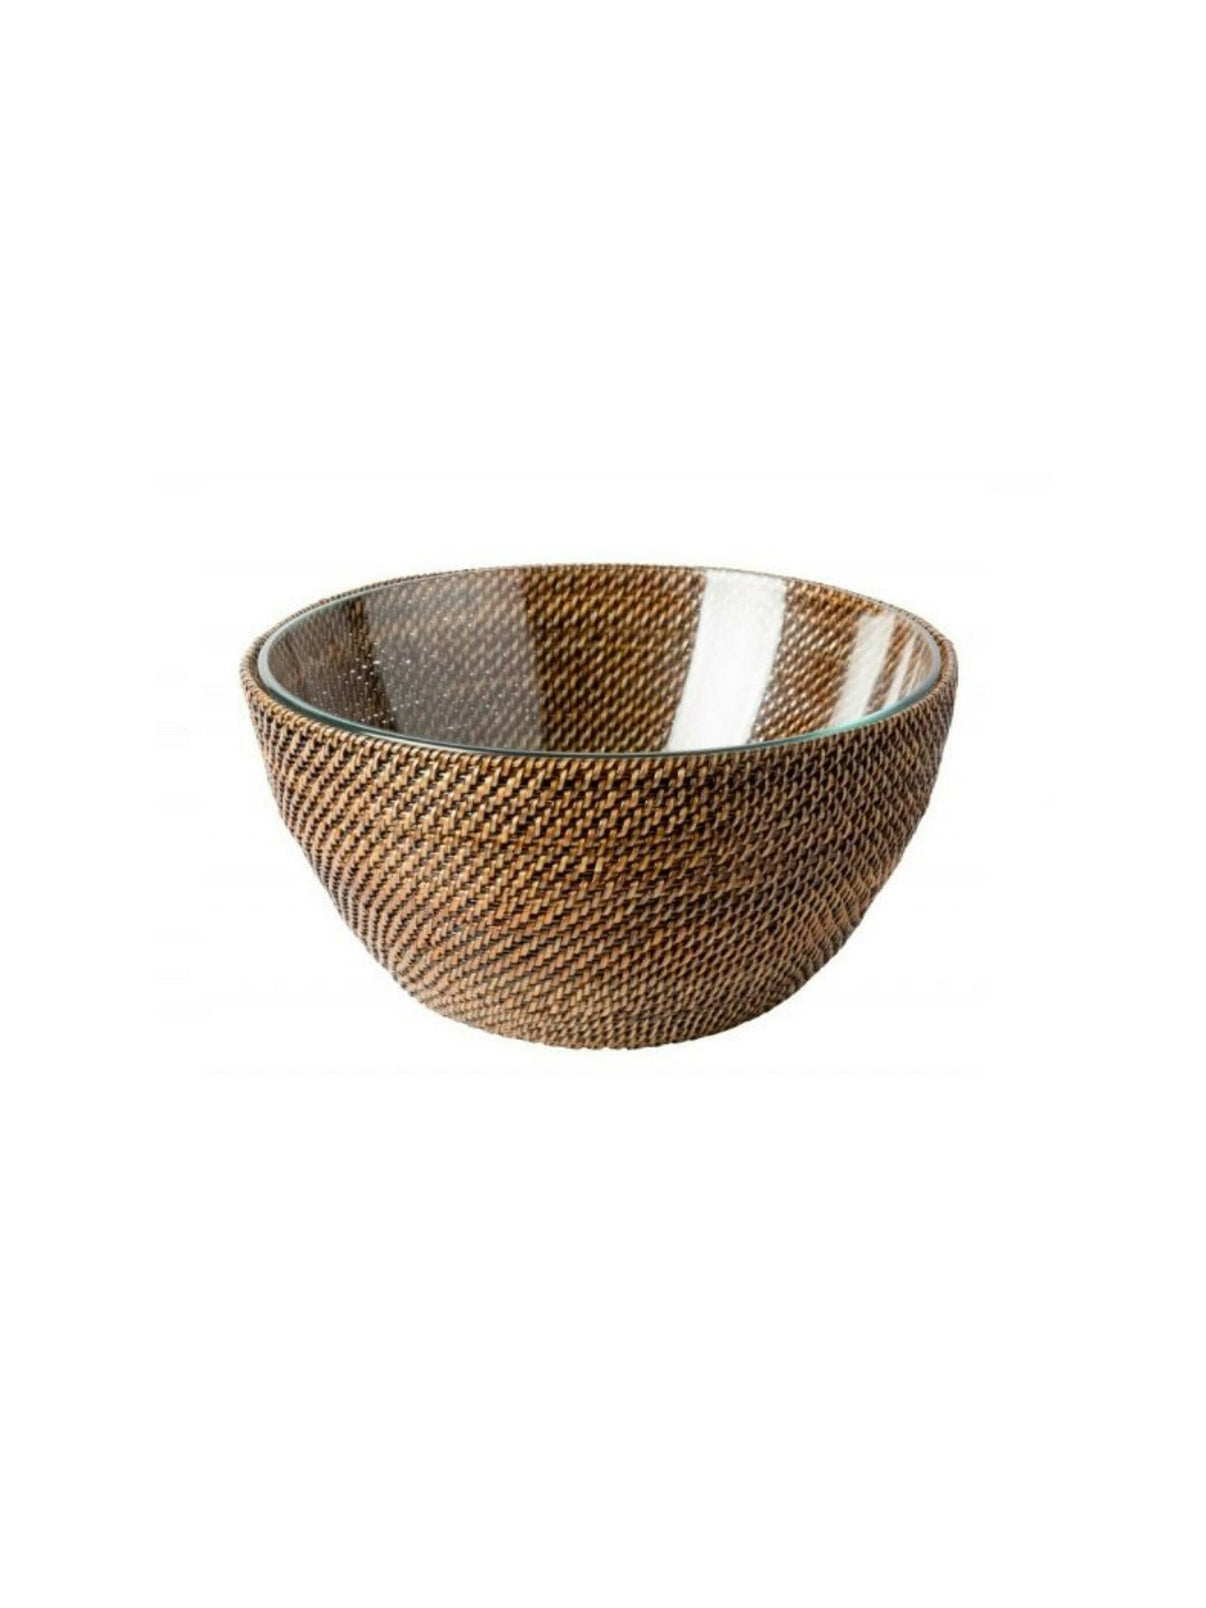 Rattan Round Bowl Server with Glass Bowls